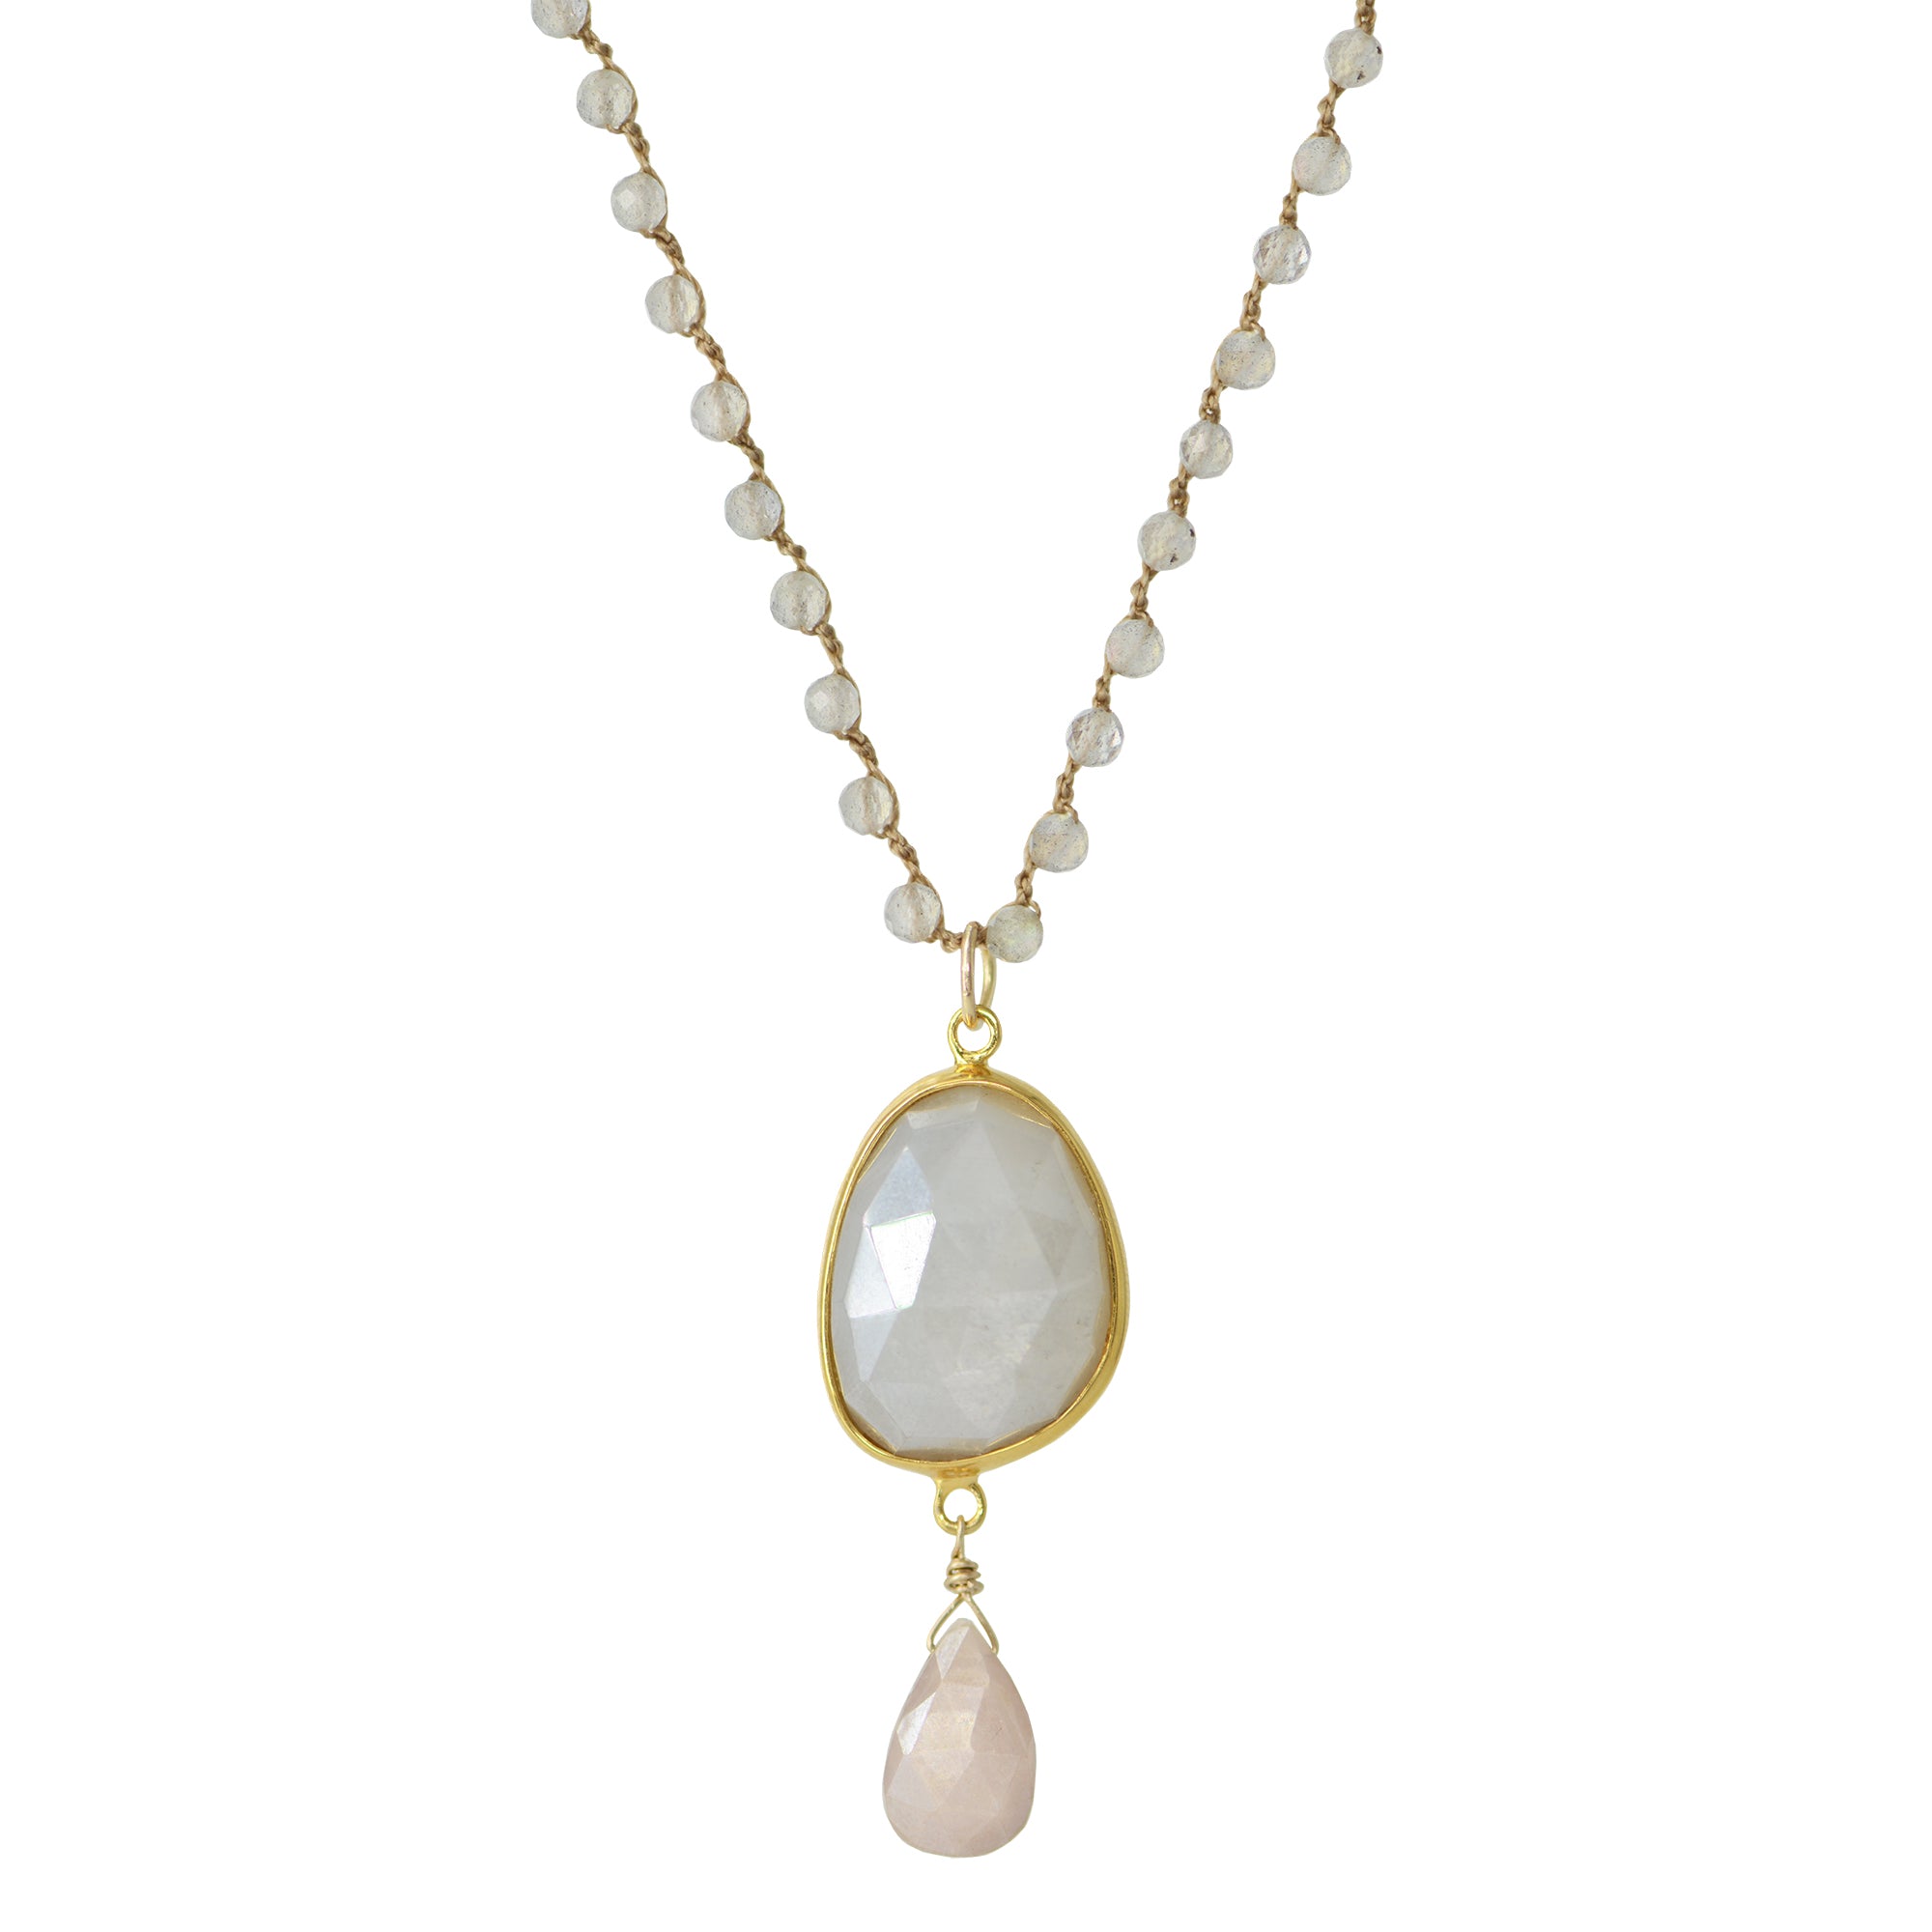 sumiko necklace in mystic moonstone with labradorite